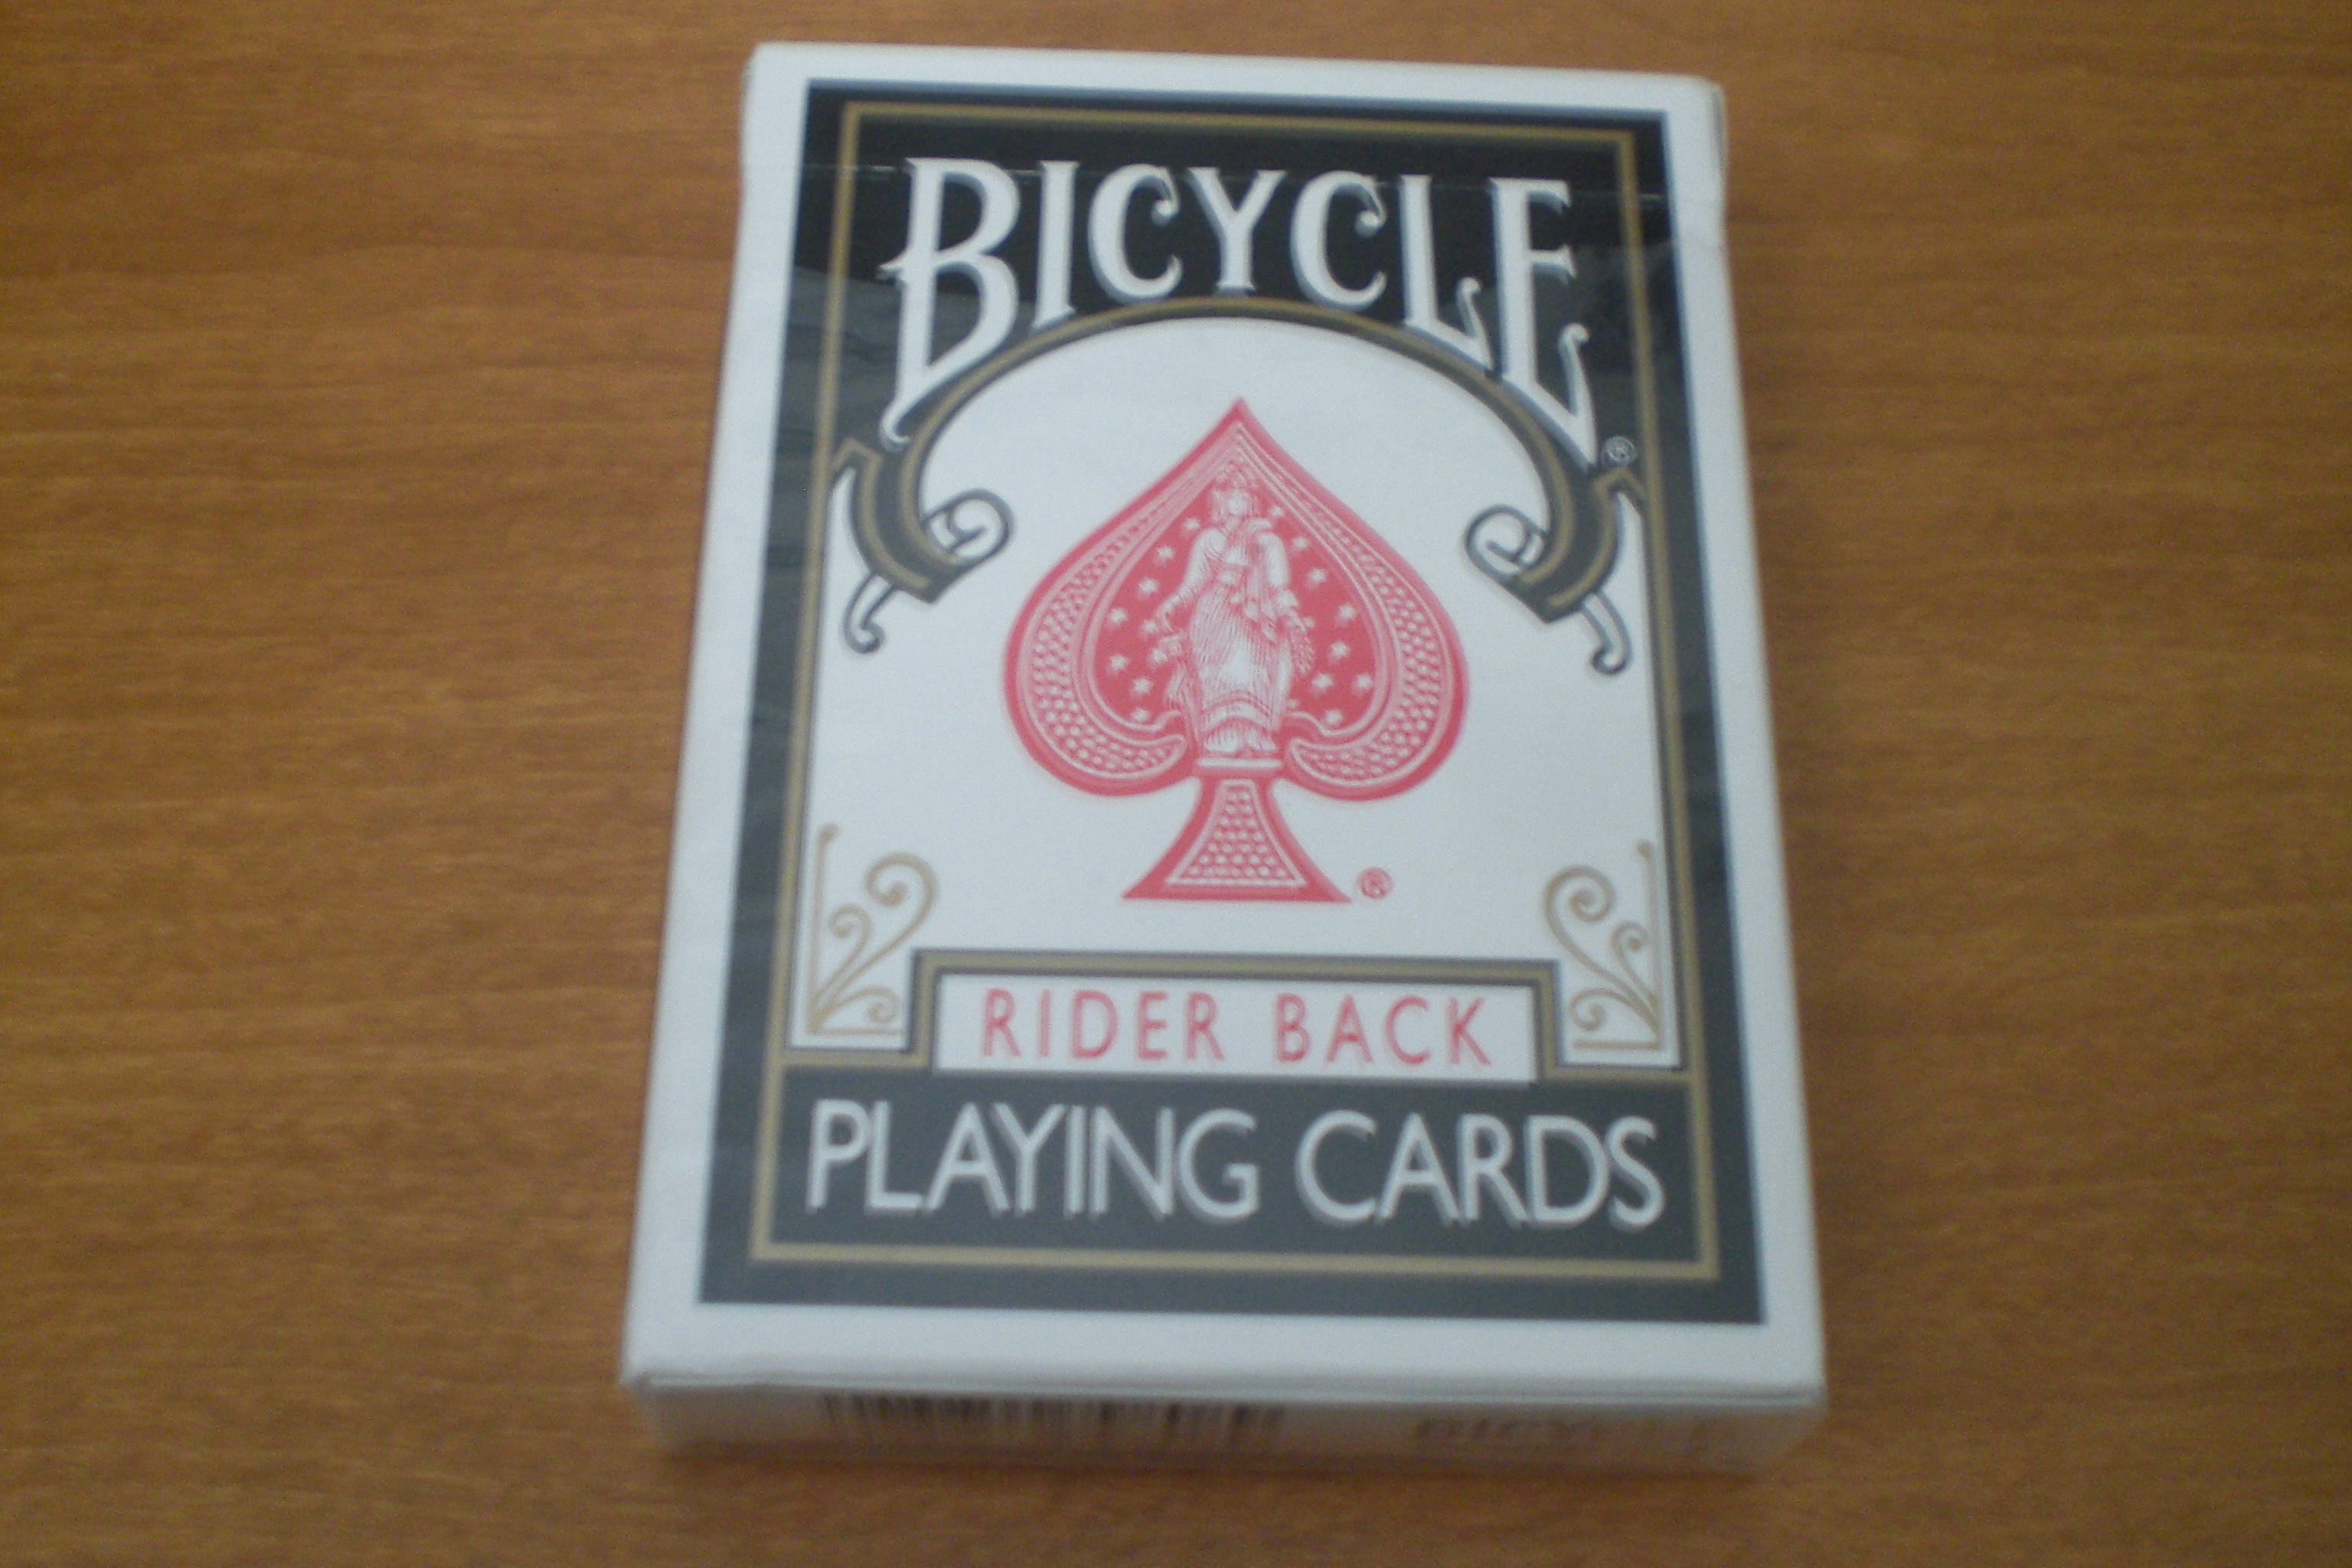 Front : Bicycle Rider Back Playing Cards